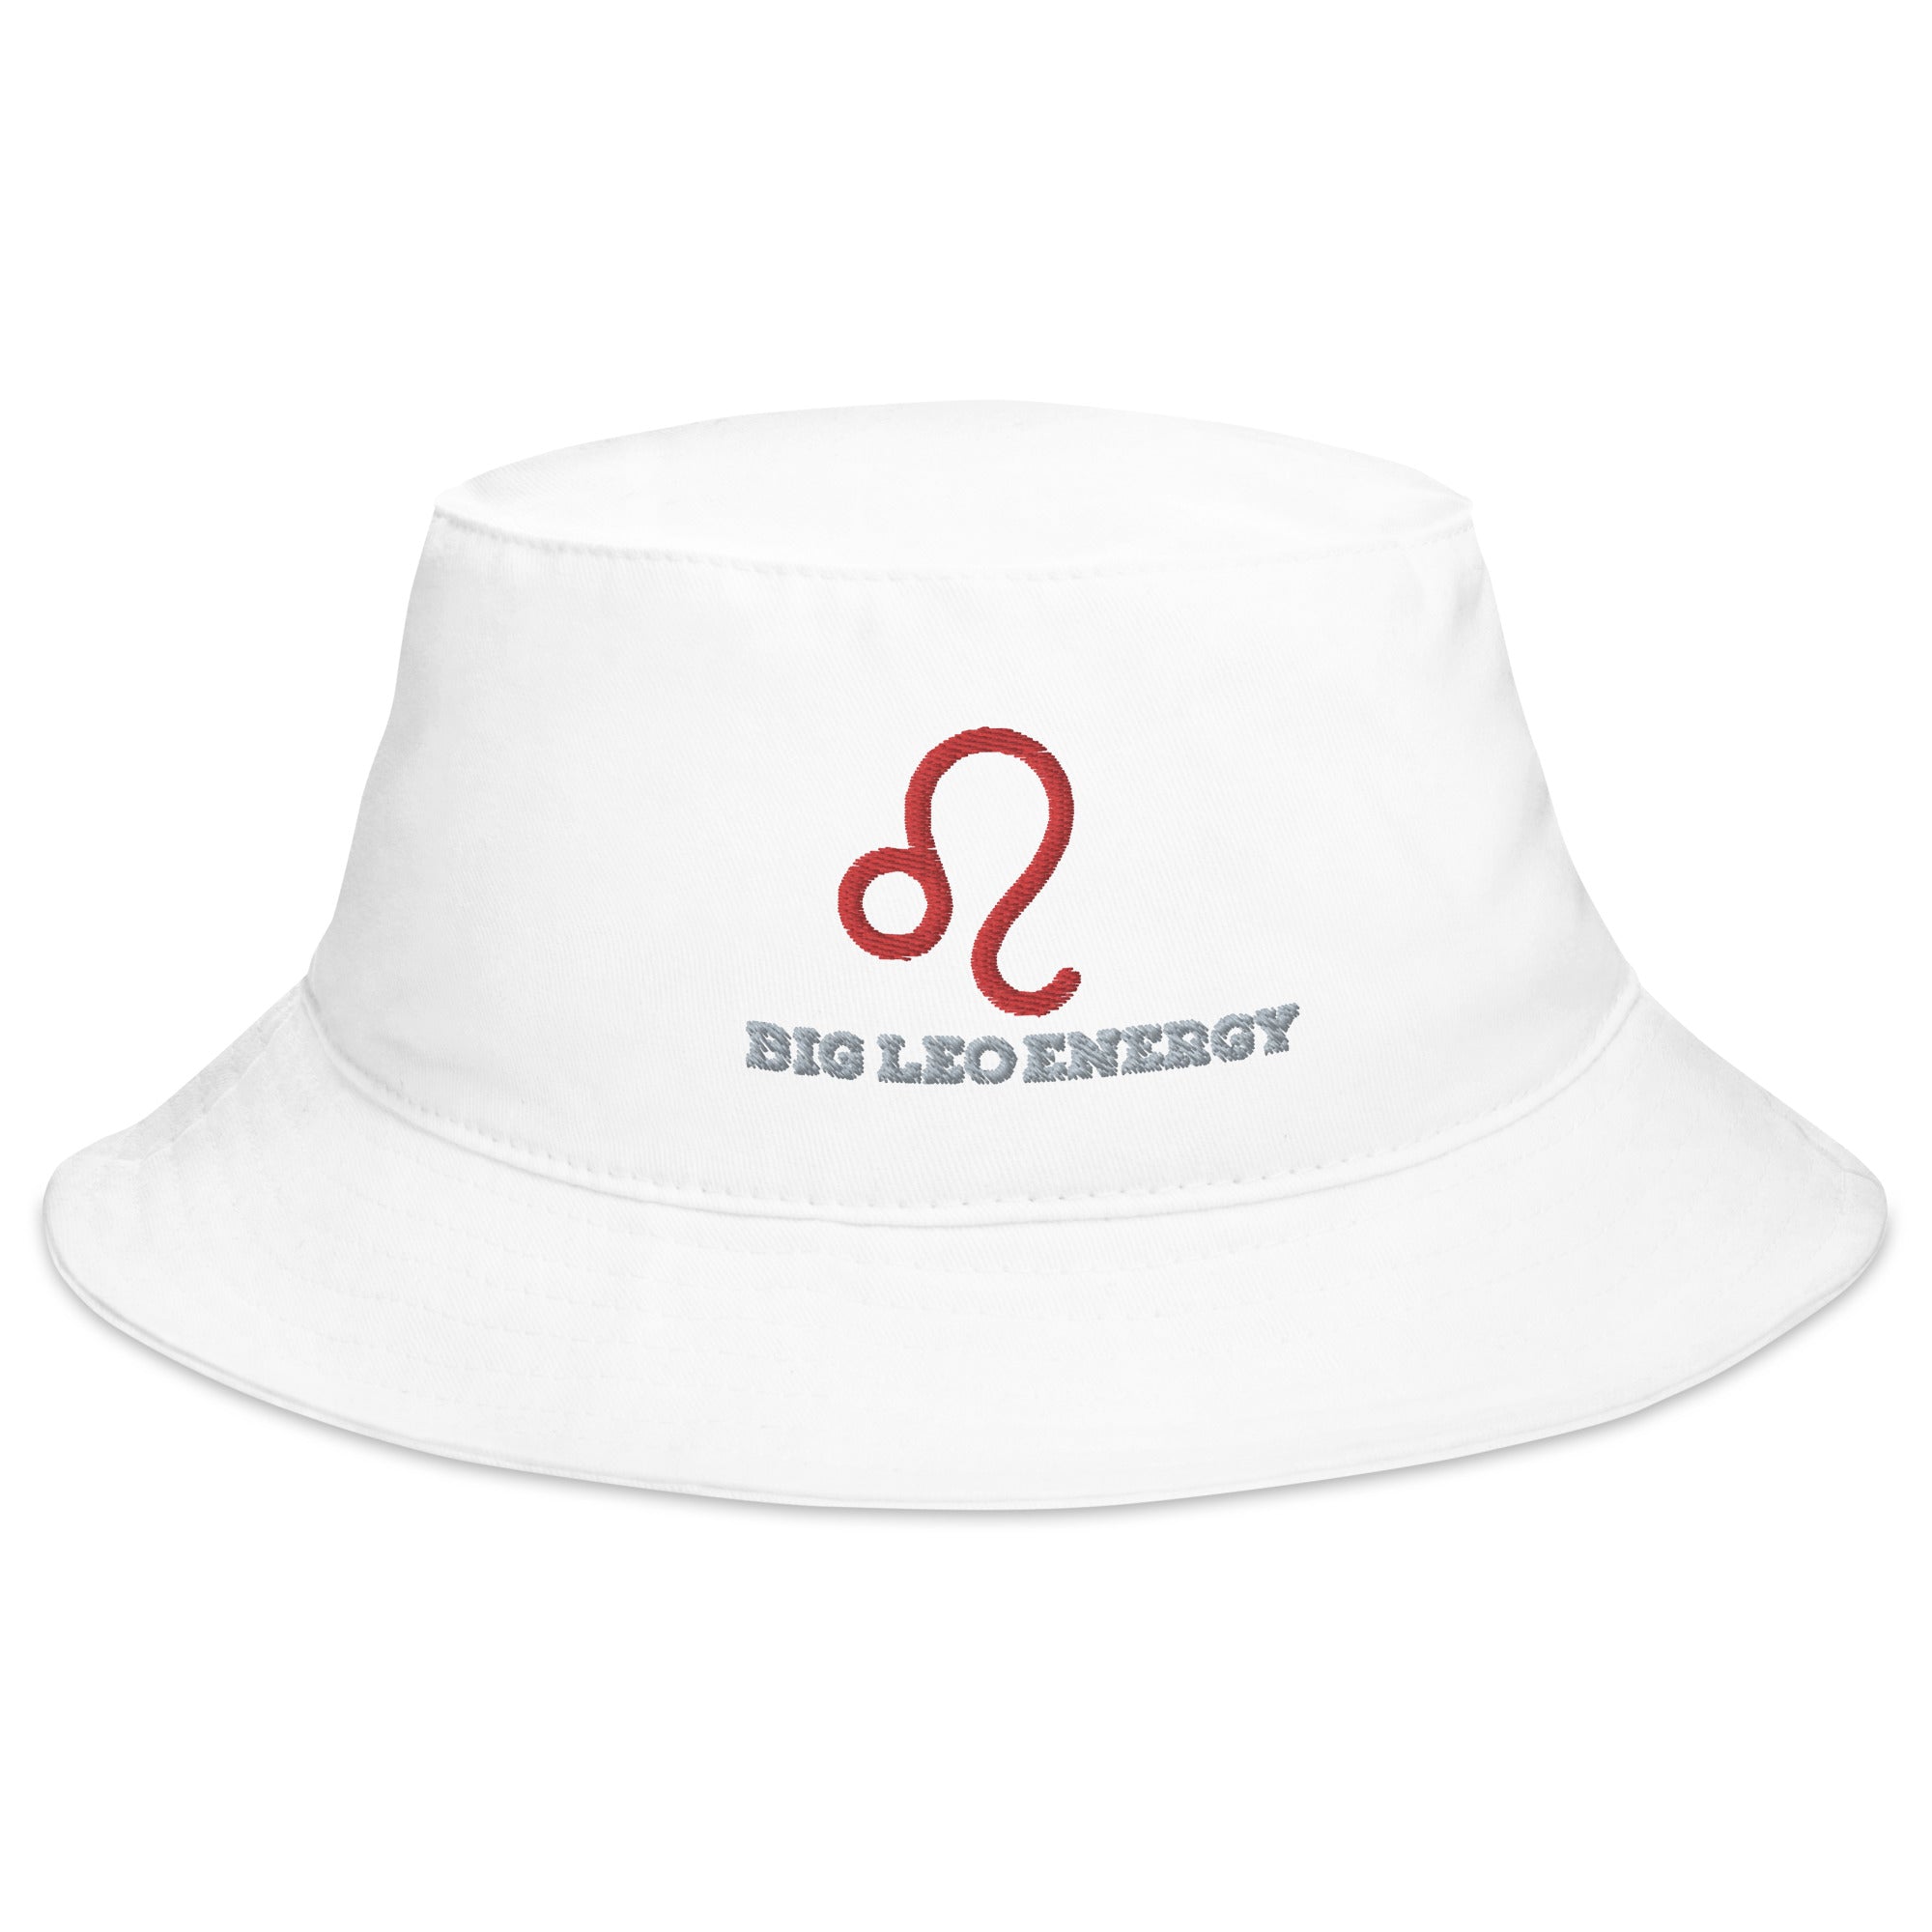 Zodiac Sign Bucket Hats: Wear Your Star Sign in Style